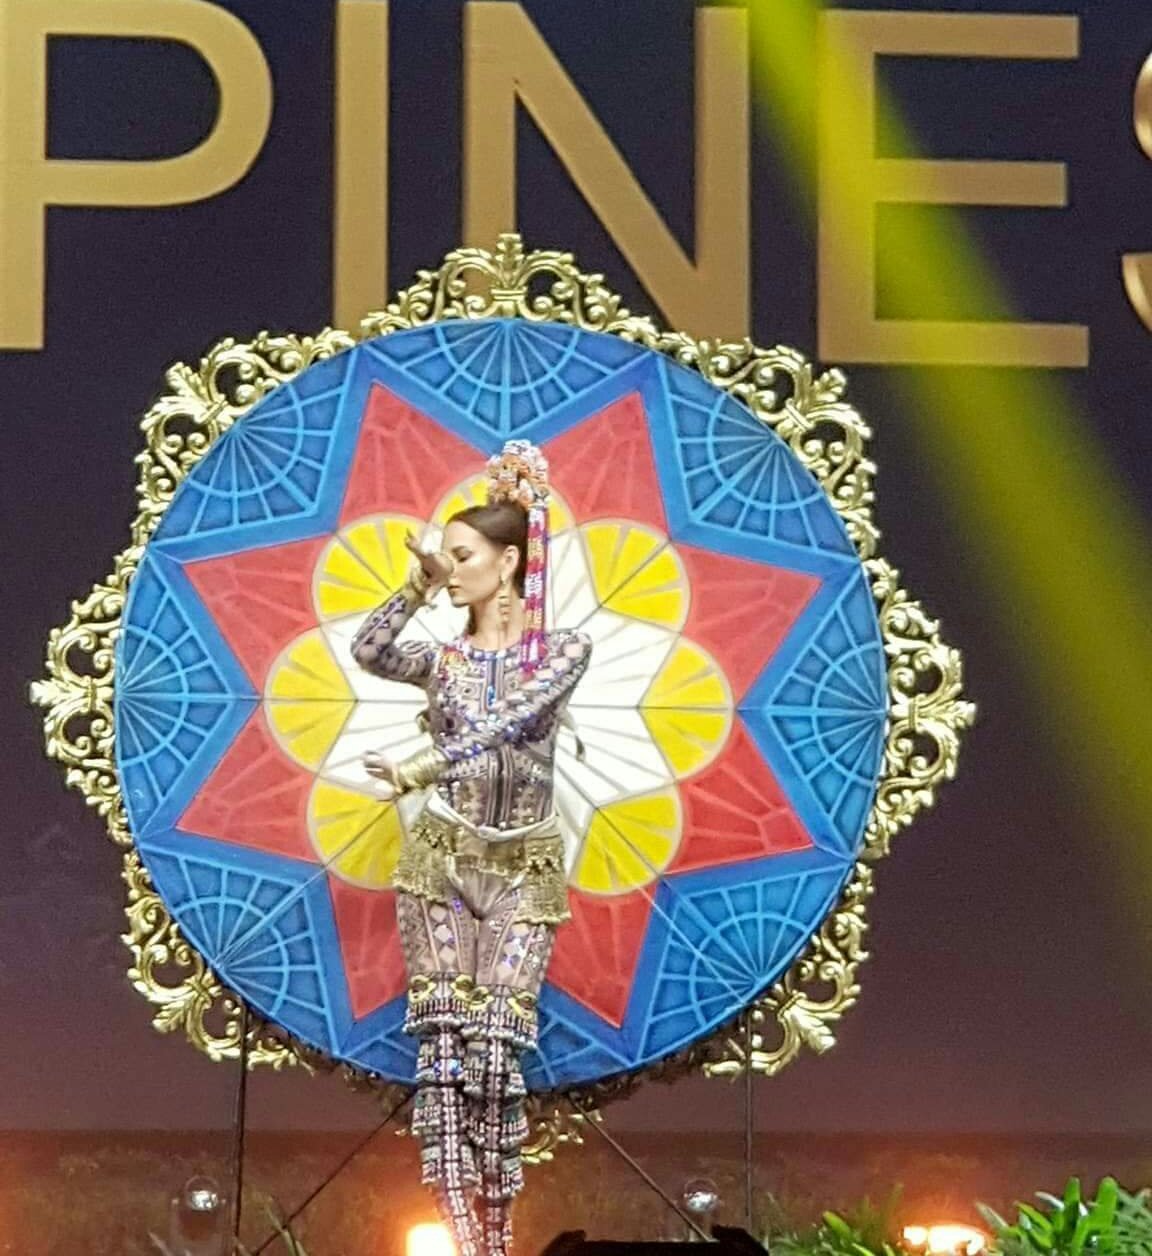 IN PHOTOS: Catriona Gray wows with Miss Universe national costume